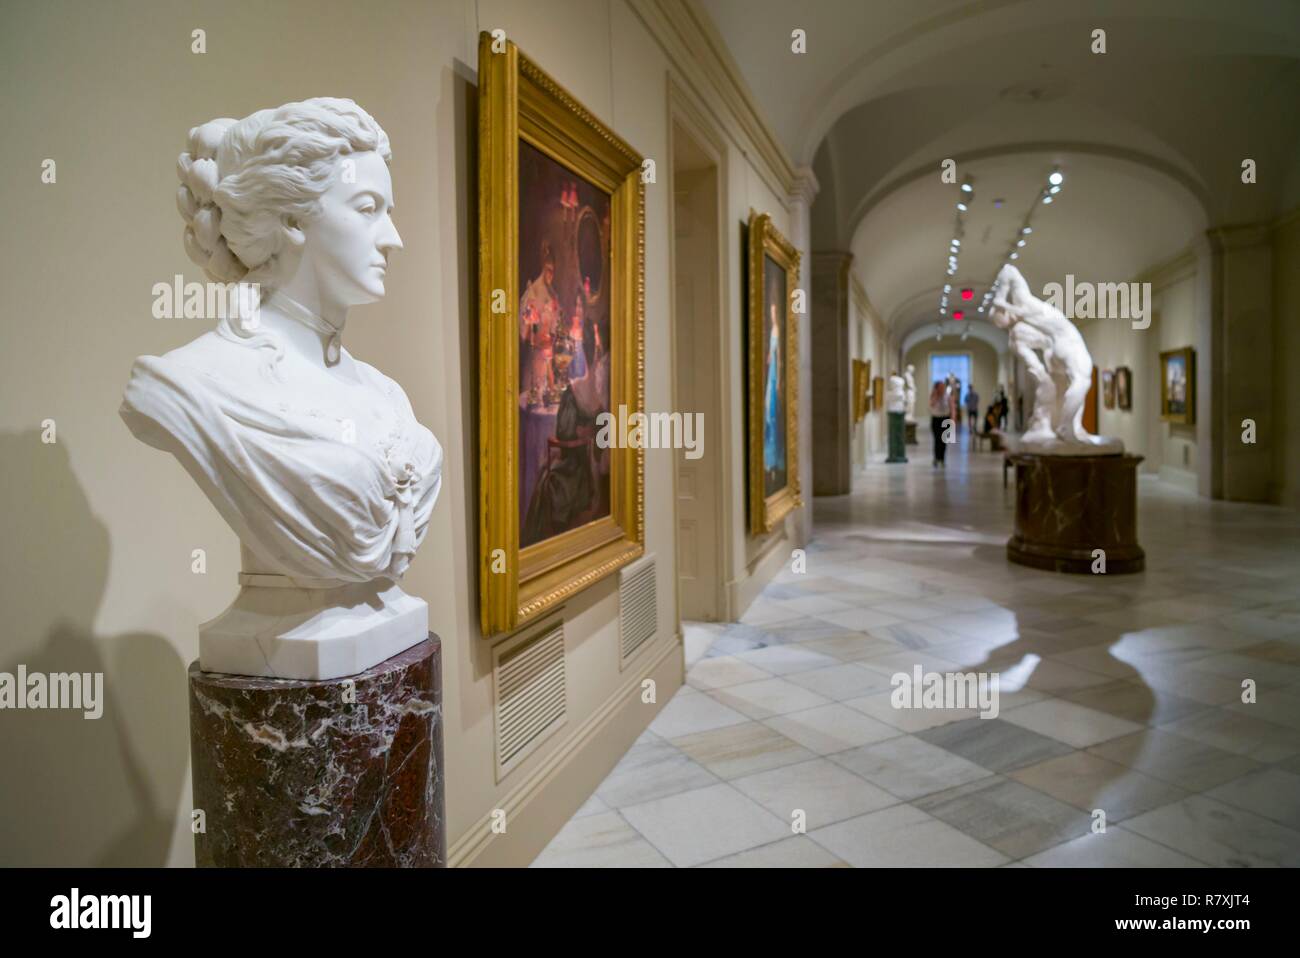 United States, District of Columbia, Washington, Reynolds Center for American Art, National Portrait Gallery, sculpture of Margareta Willoughby Pierpoint by Agustus Saint-Gaudens Stock Photo